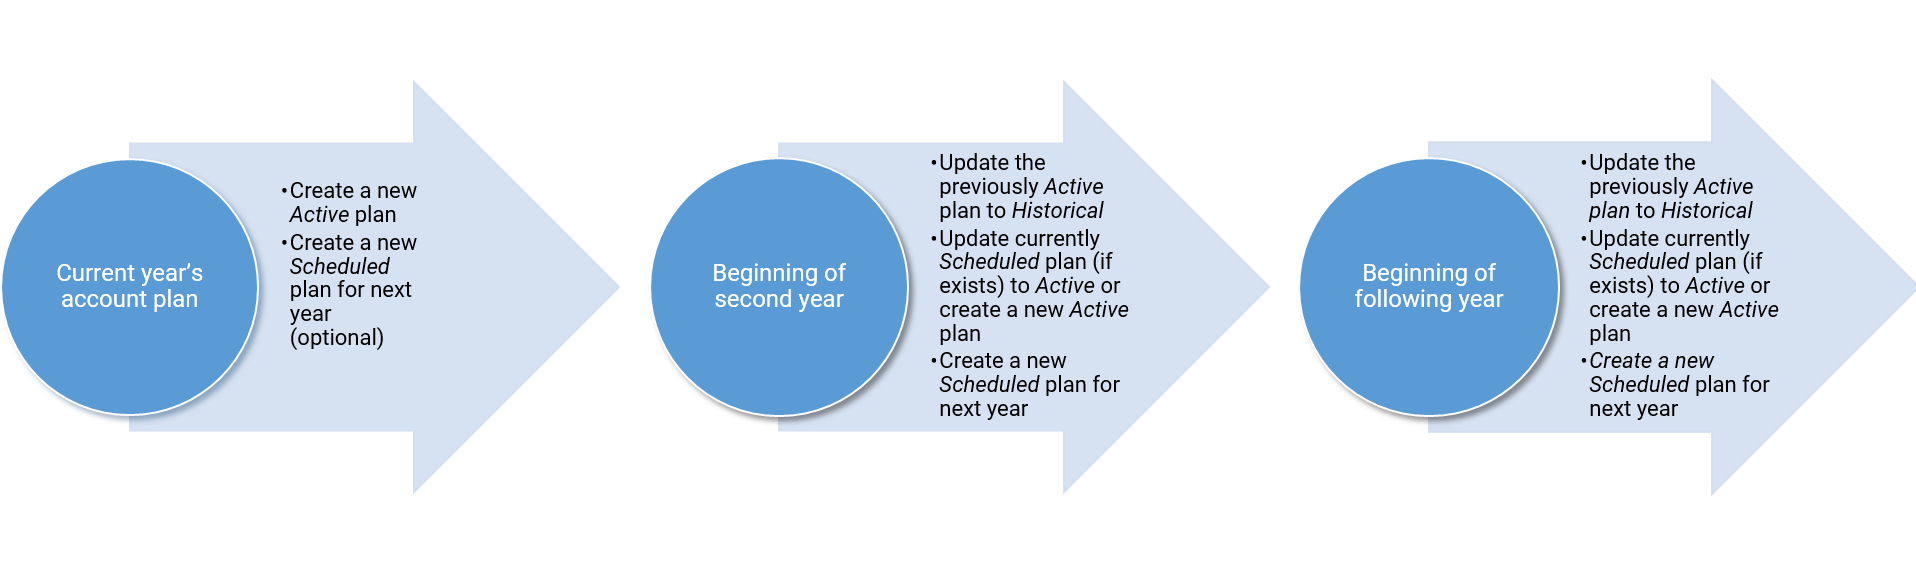 Managing the life cycle of a company's account plans